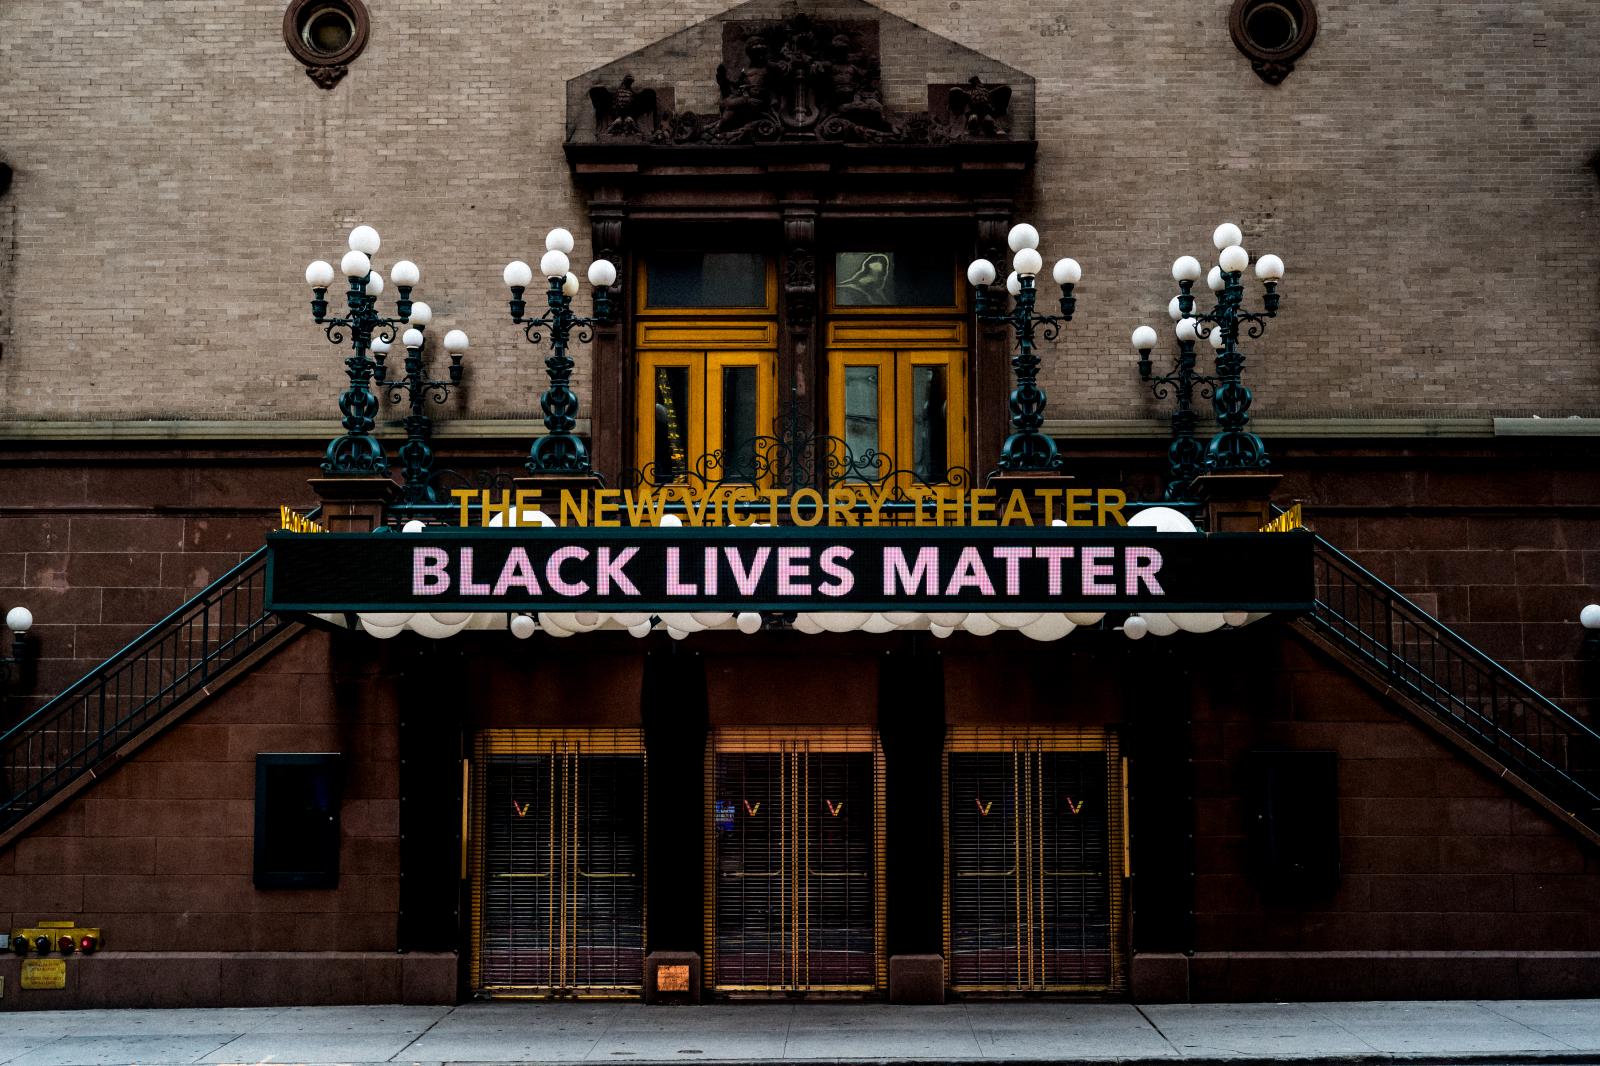 Image from Black Lives Matter -  July 11, 2020  Times Square/42nd Street, Manhattan NYC 